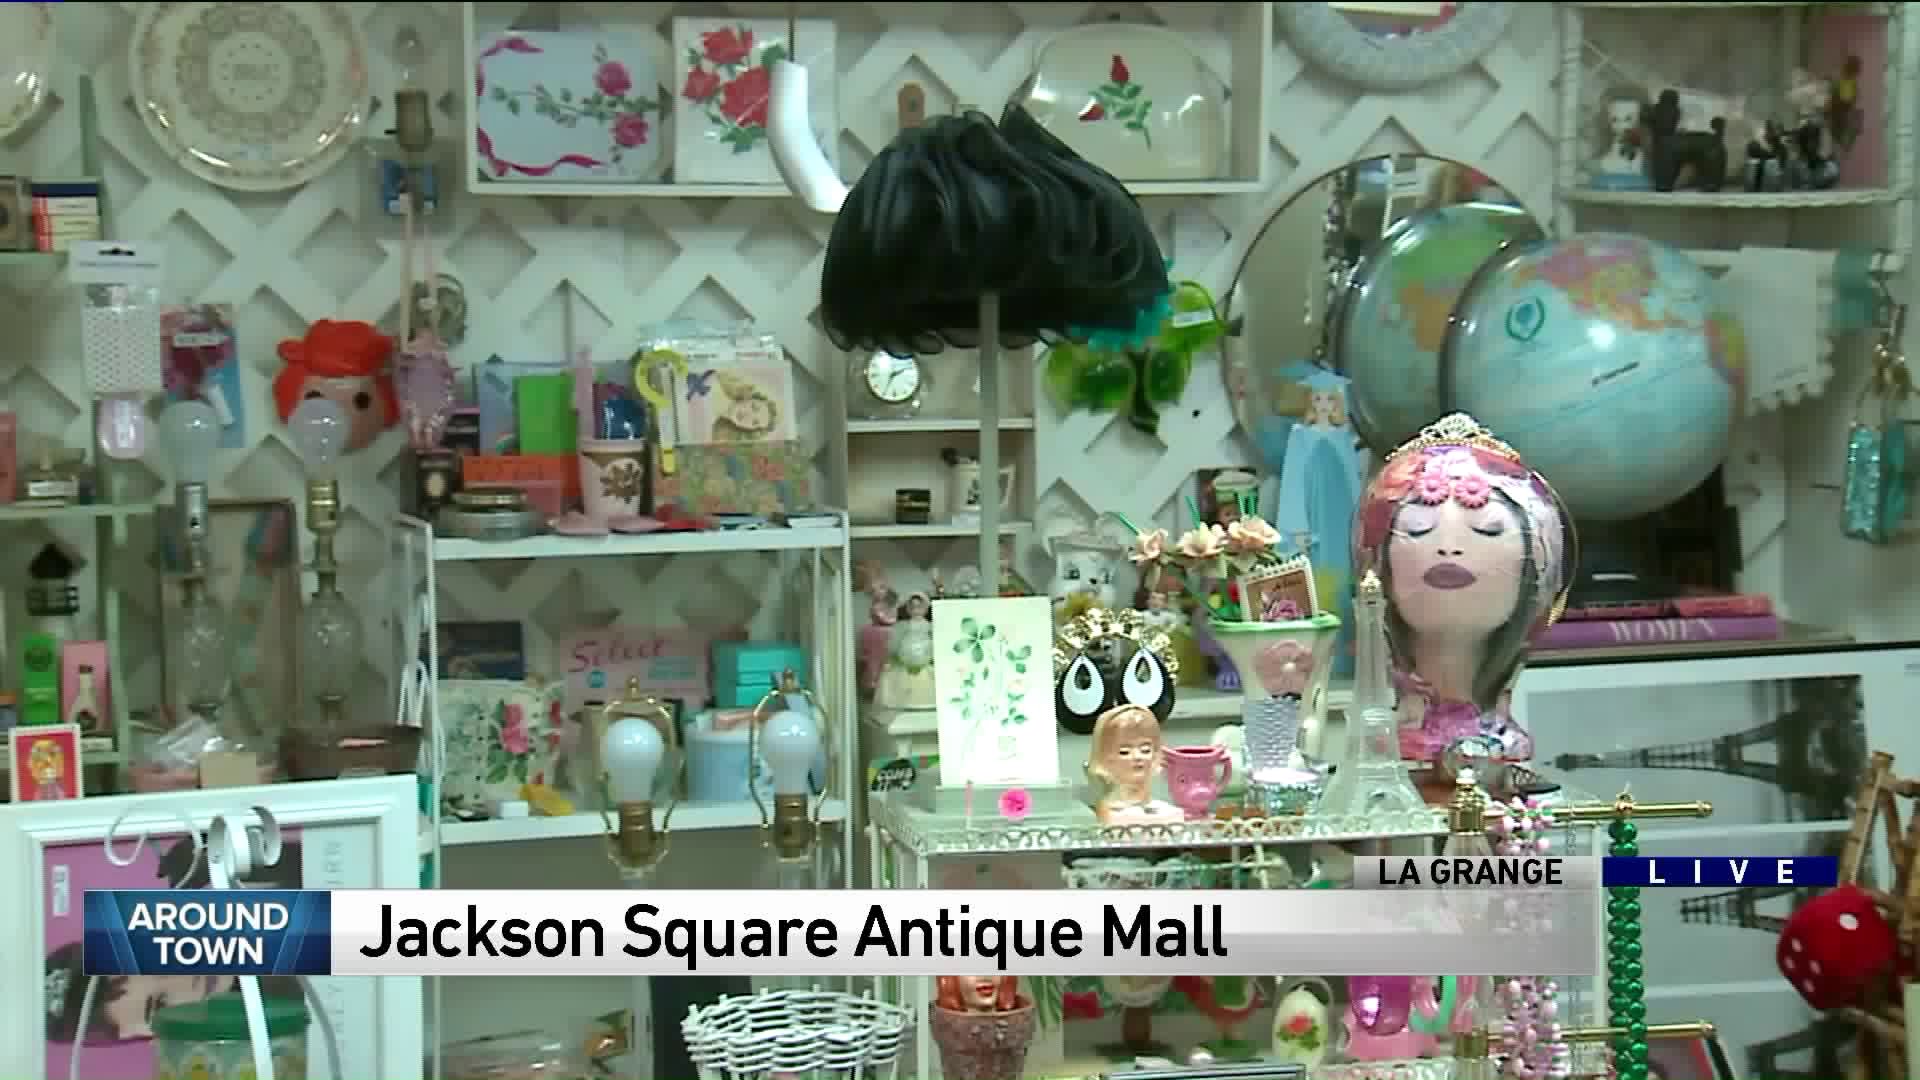 Around Town checks out the Jackson Square Antique Mall